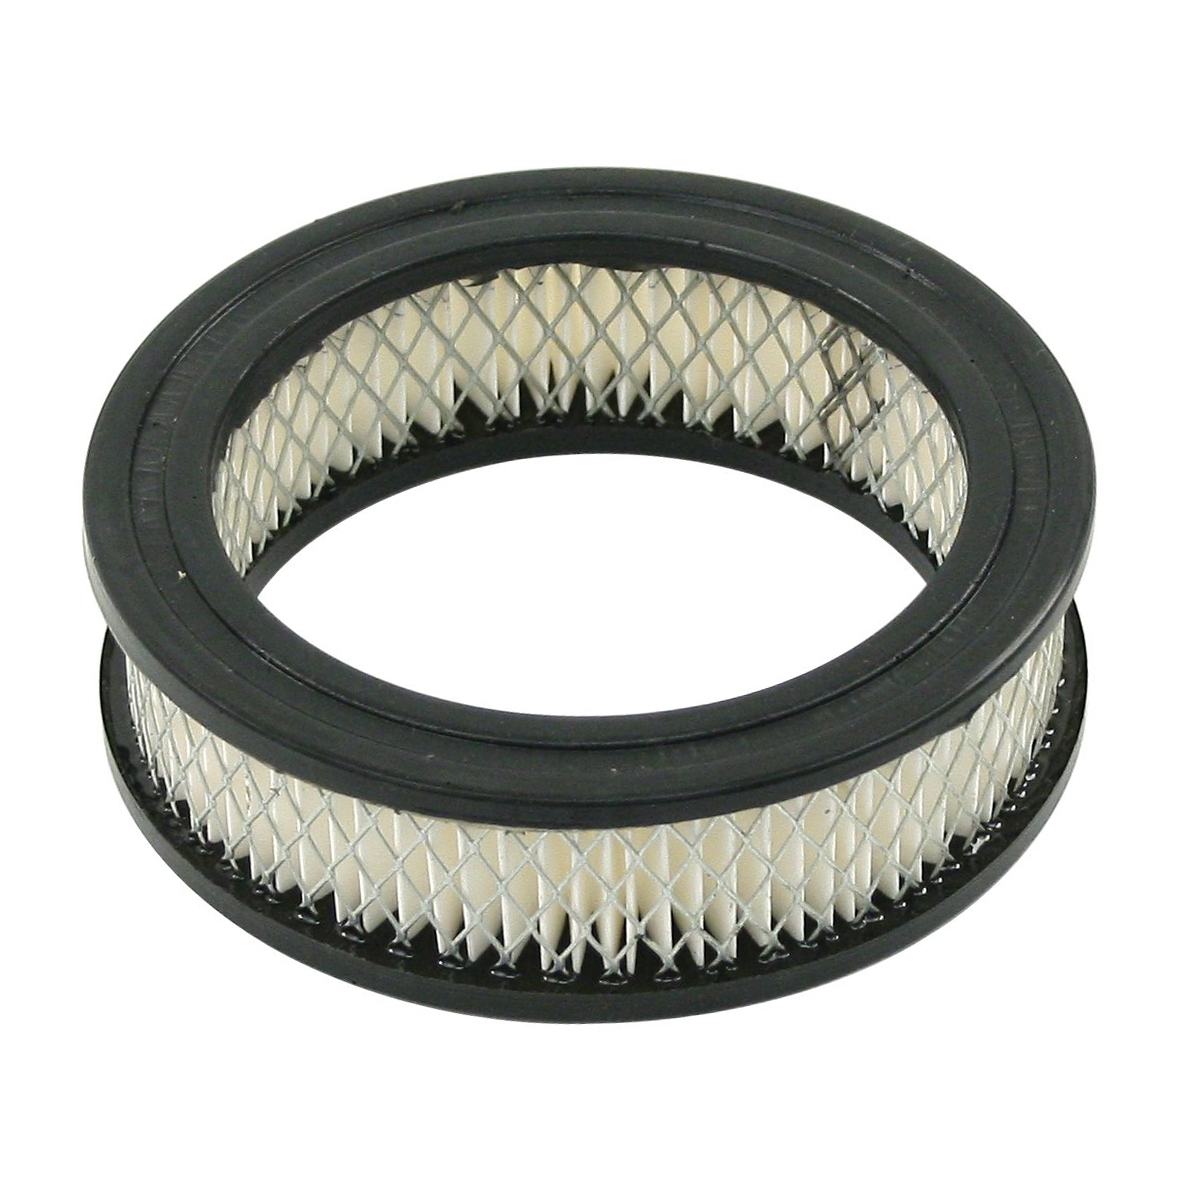 Replacement VW Air Filter - Paper Element - 1 1/2" High